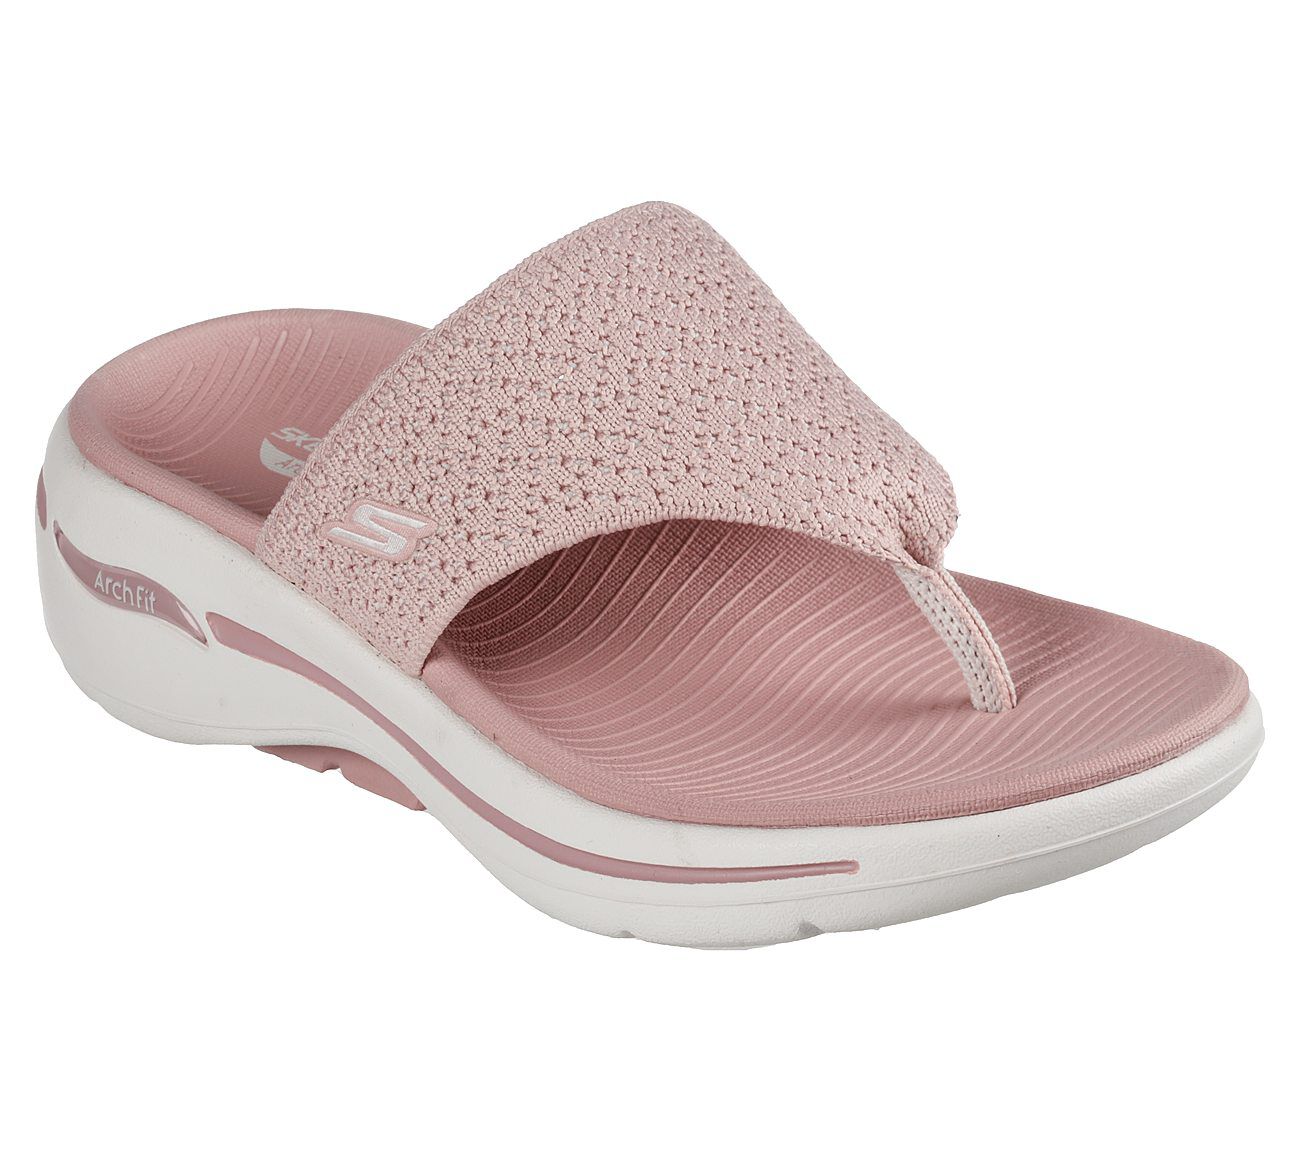 Discount Tadkaa India Limtied | Skechers Slippers